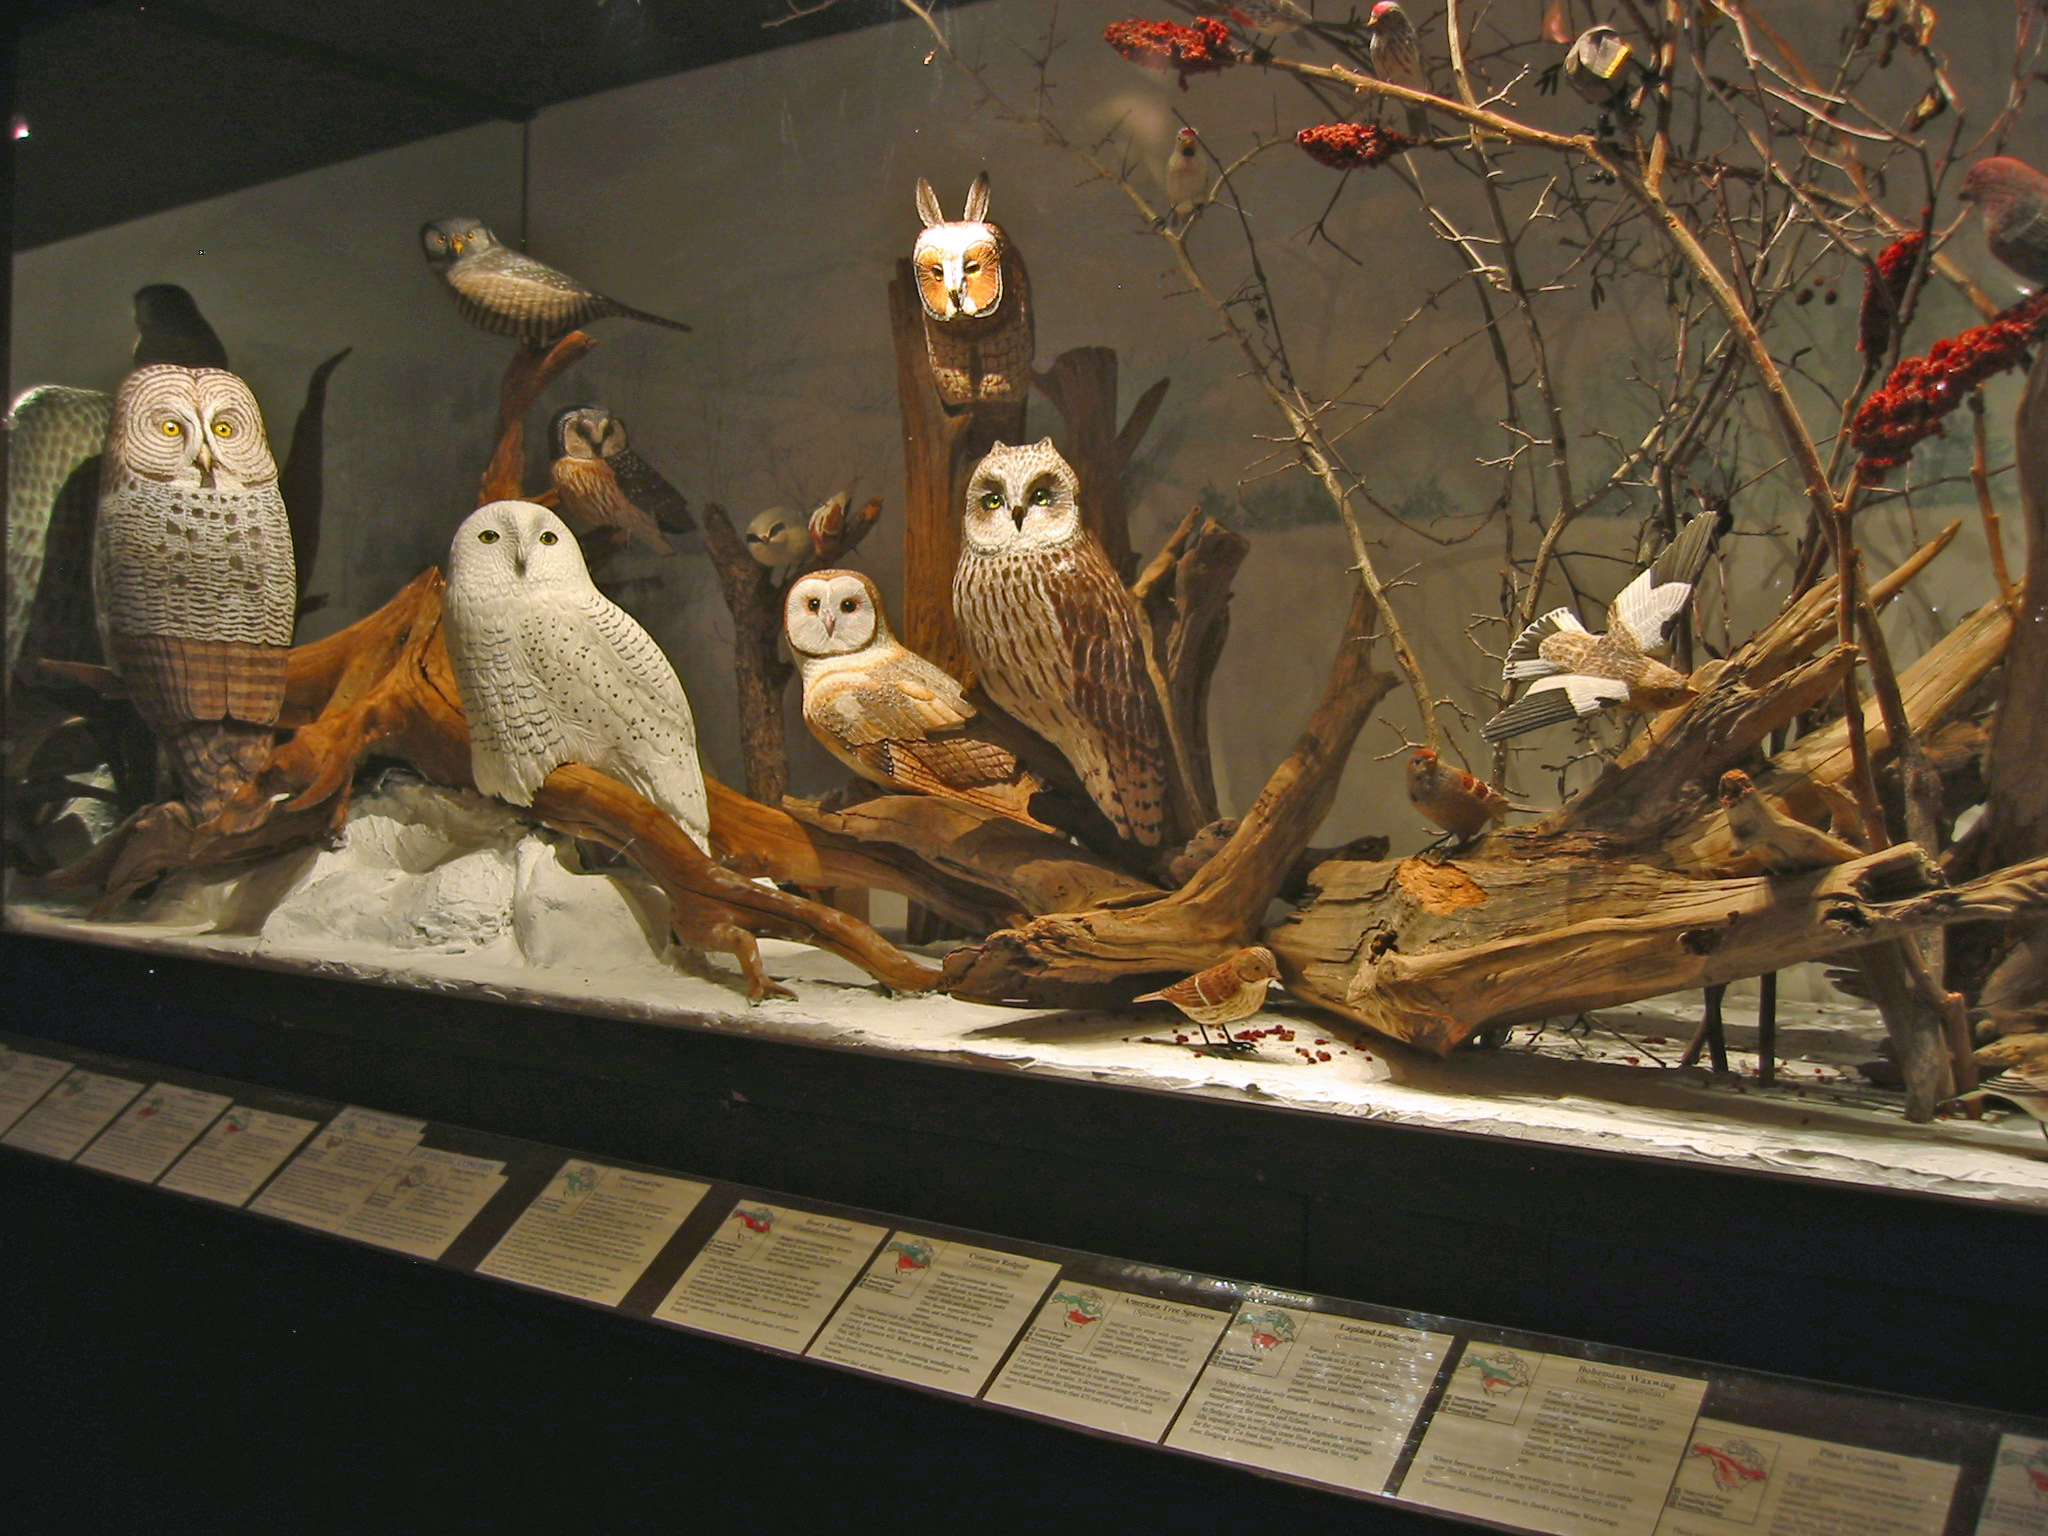 Several woodcarvings of winter owls and others shown together in a winter scene